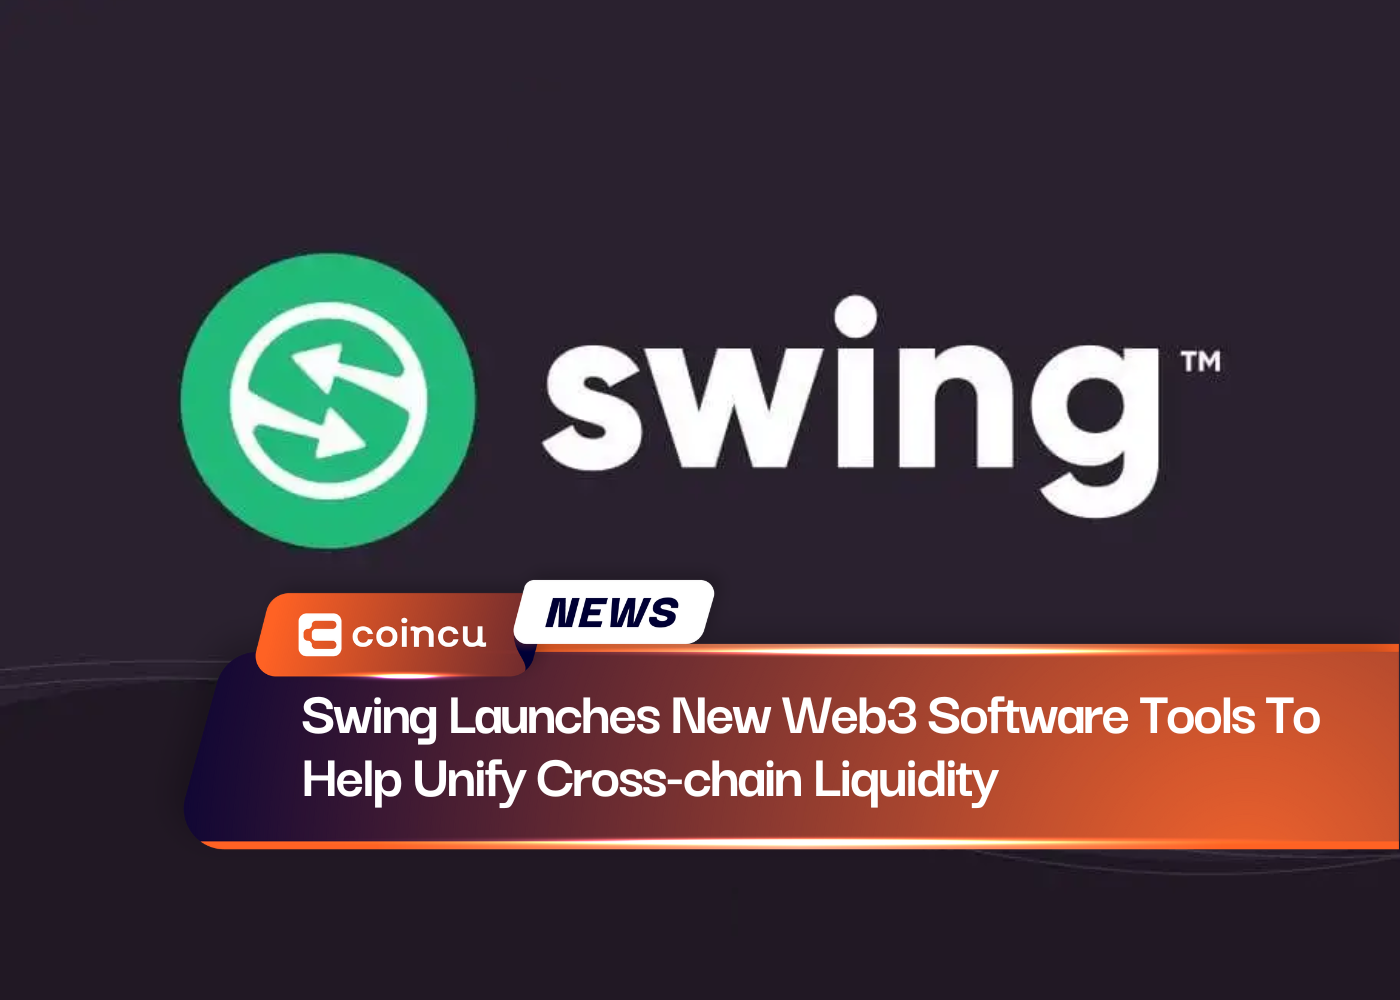 Swing Launches New Web3 Software Tools To Help Unify Cross-chain Liquidity